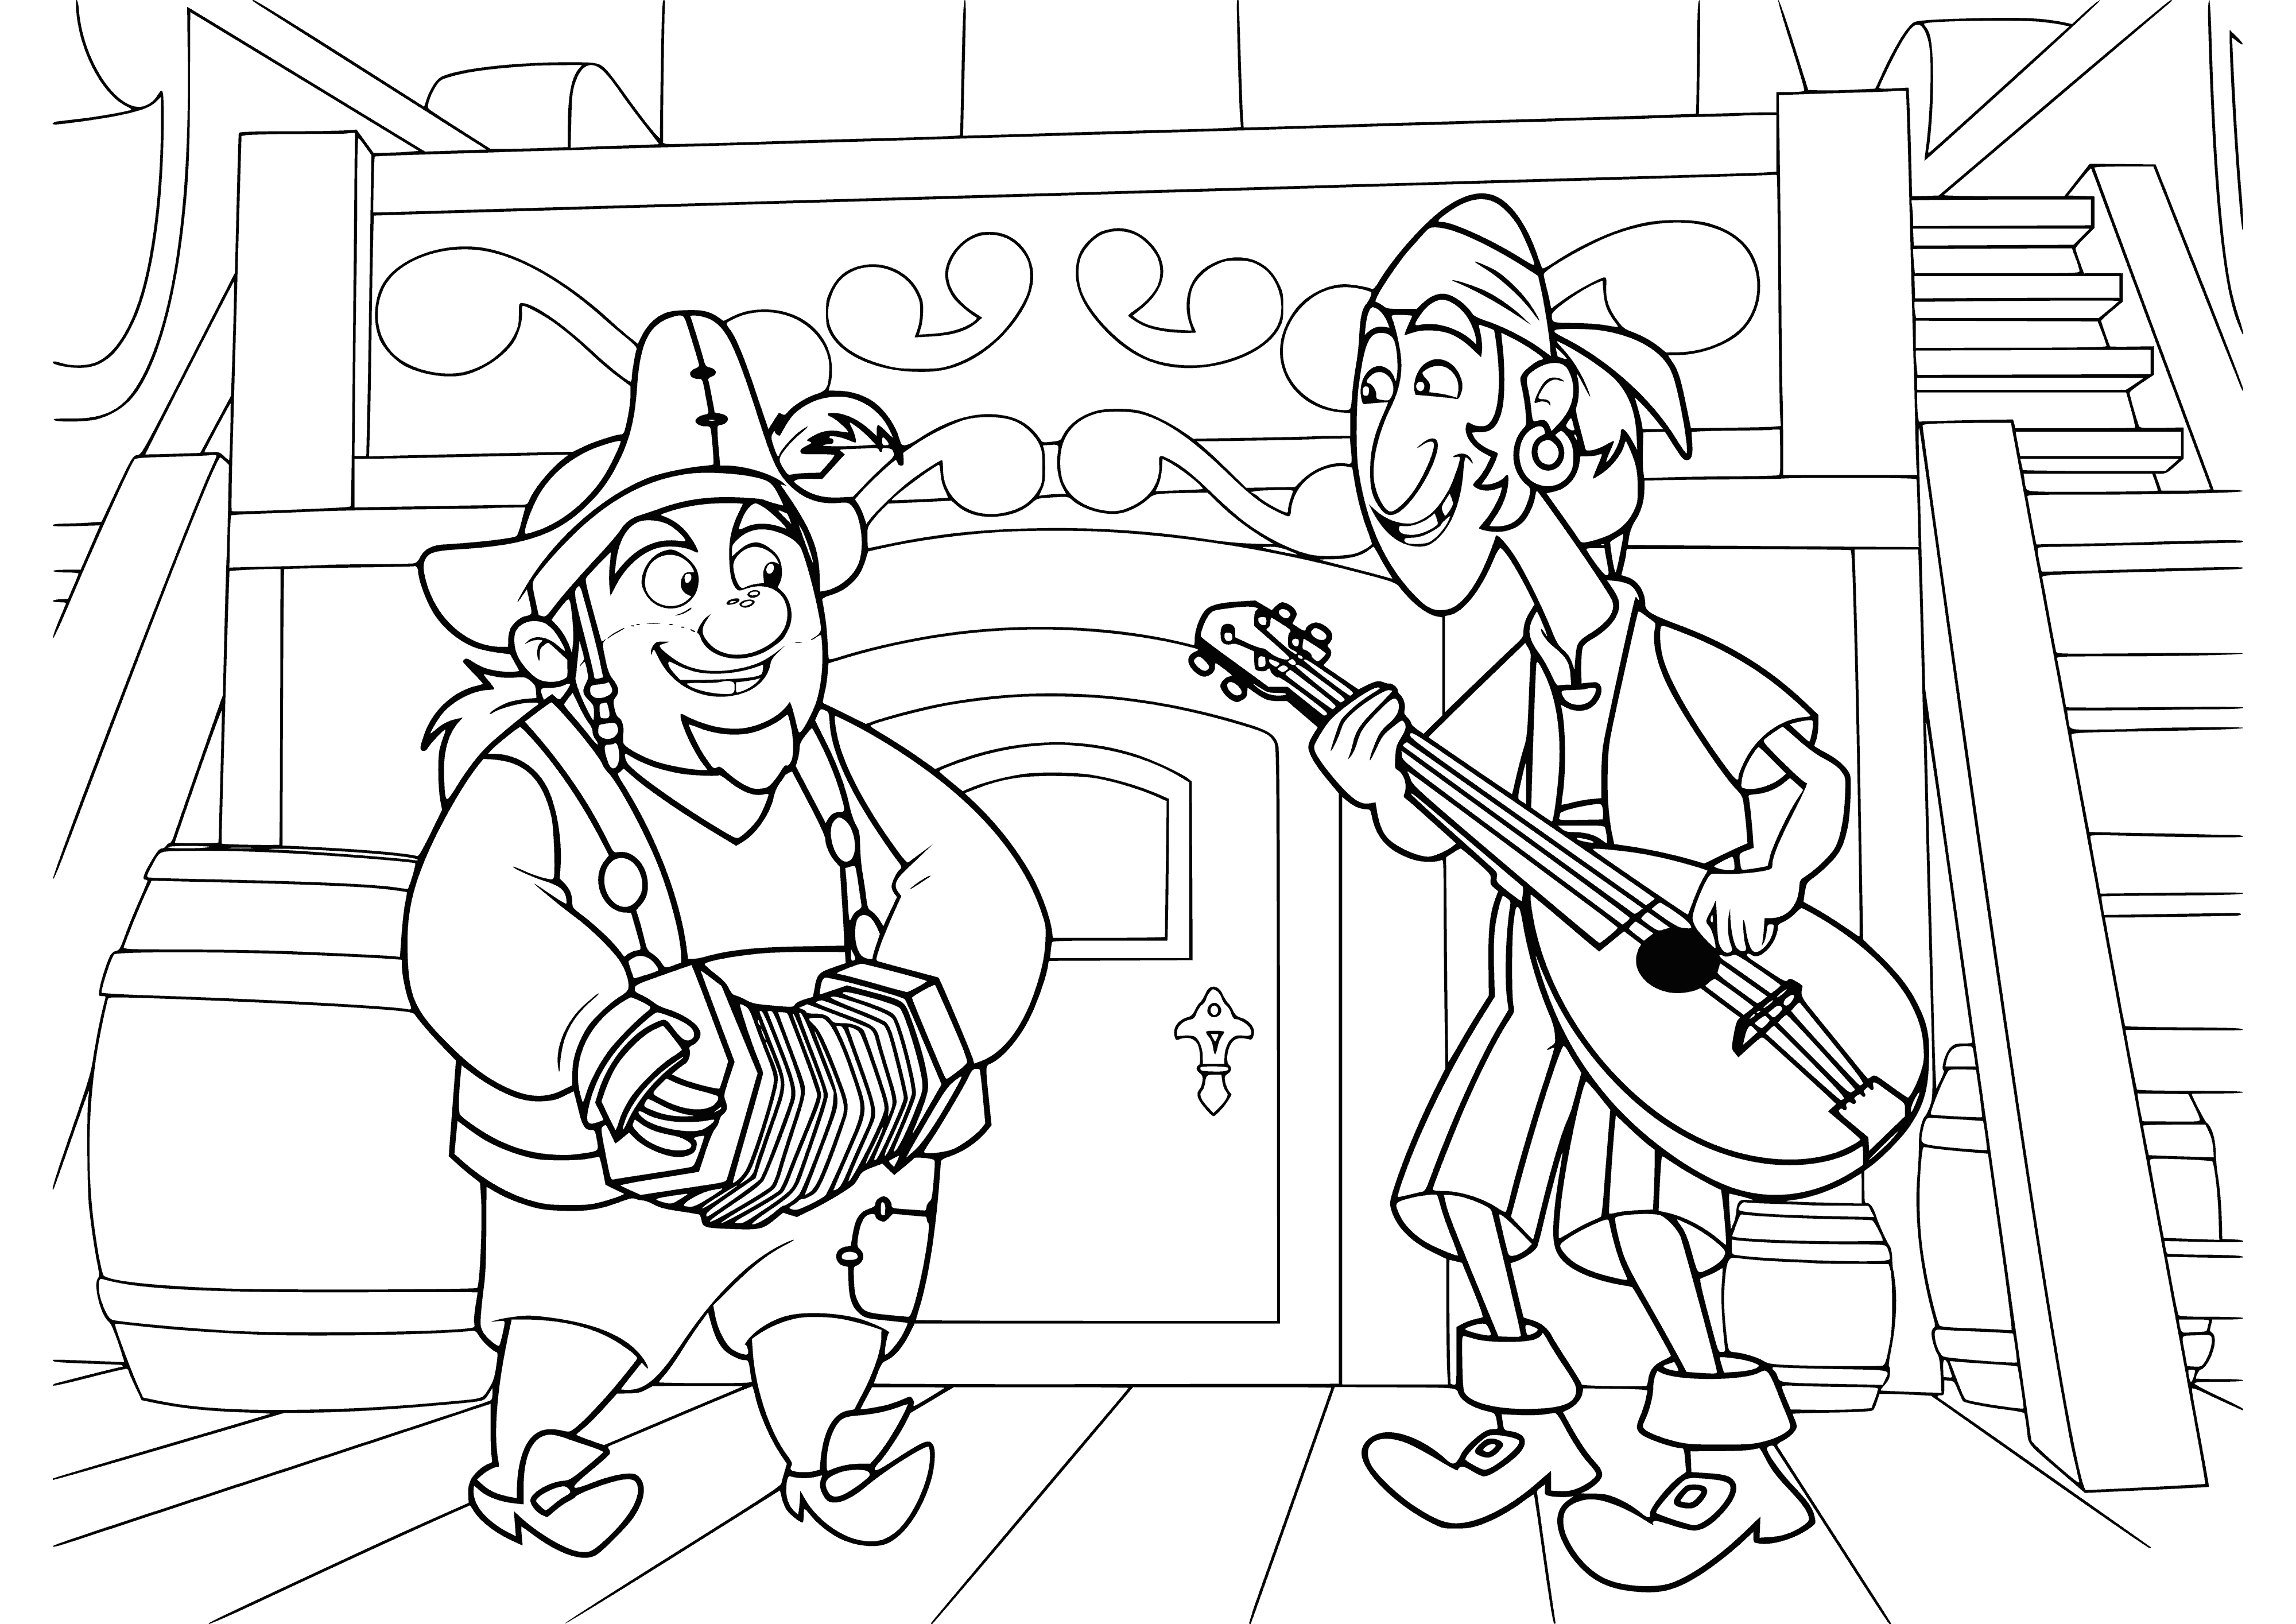 coloring page: Pirate musicians Jake & friends make music, happy & excited playing different instruments & singing.